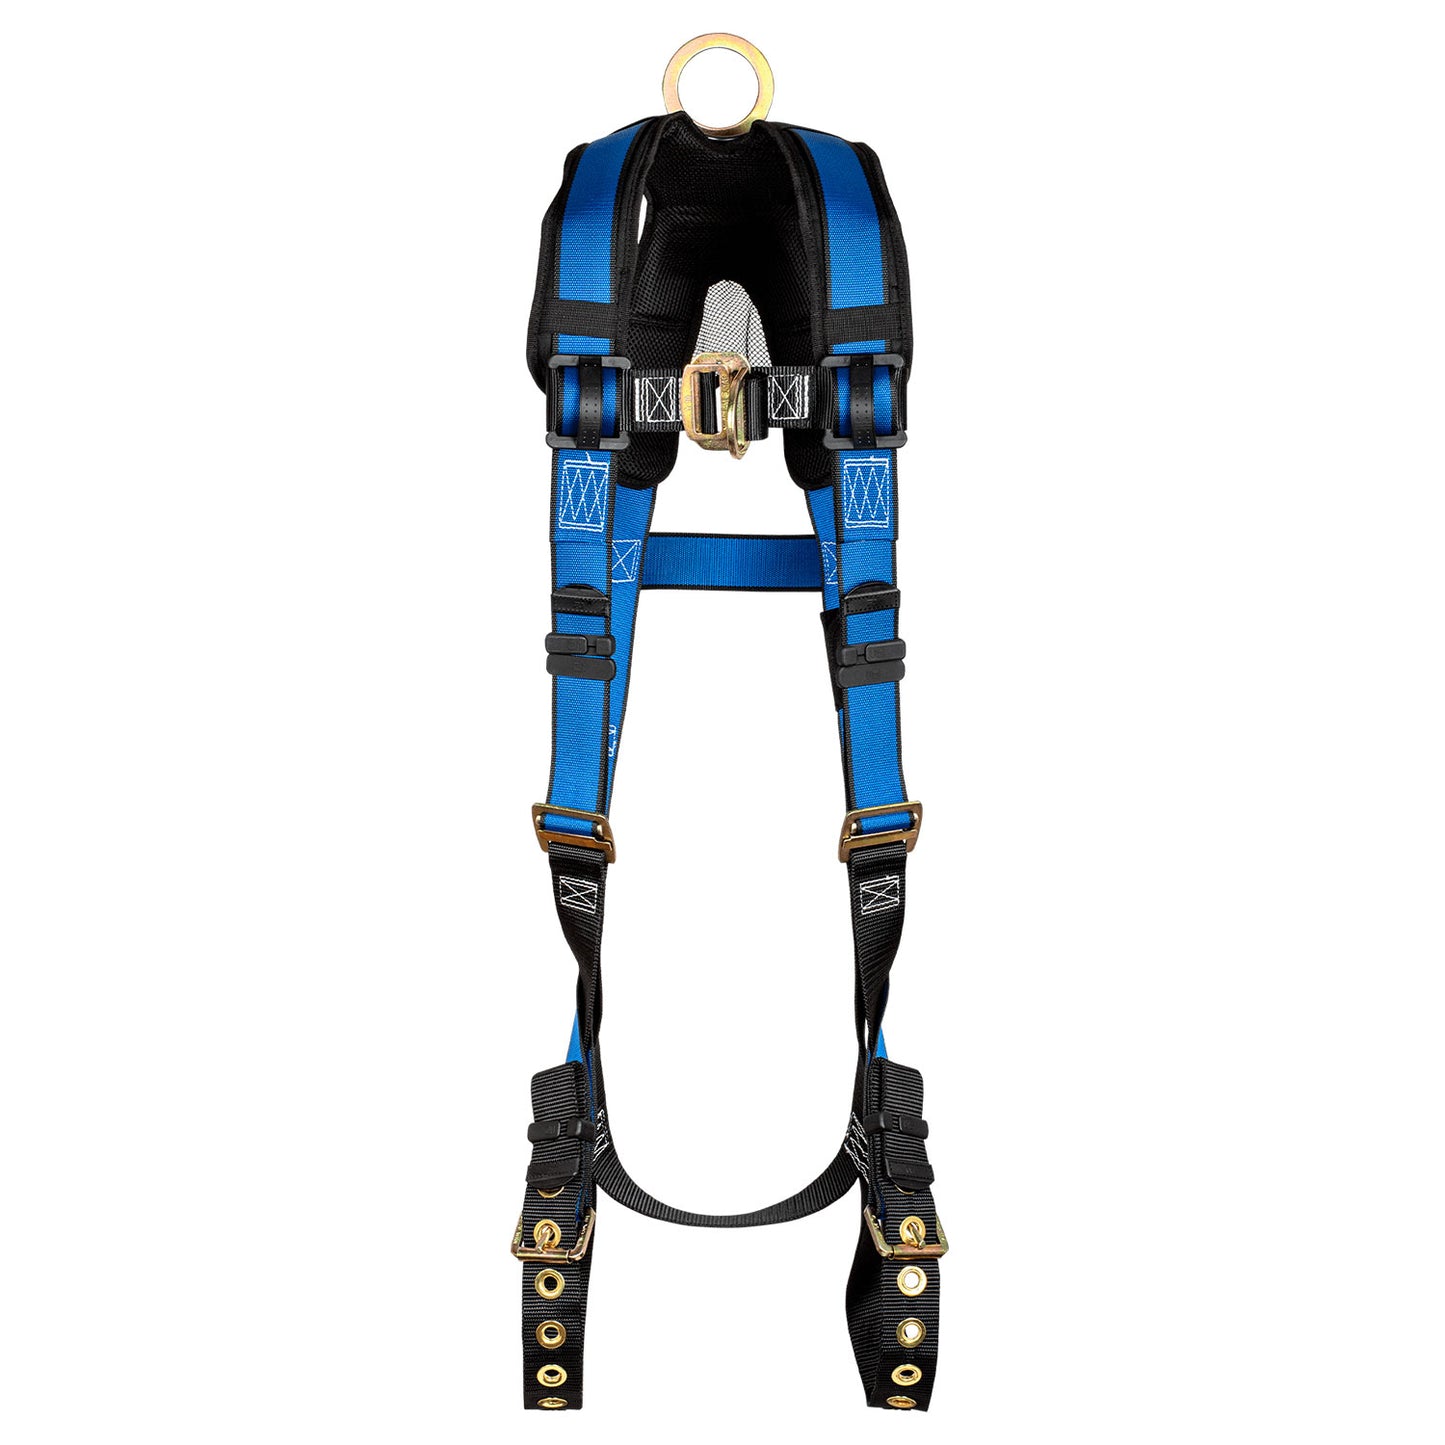 FallTech Contractor Full-Body Safety Harness | Non-Belted | UniFit (S/M/L) | 7016